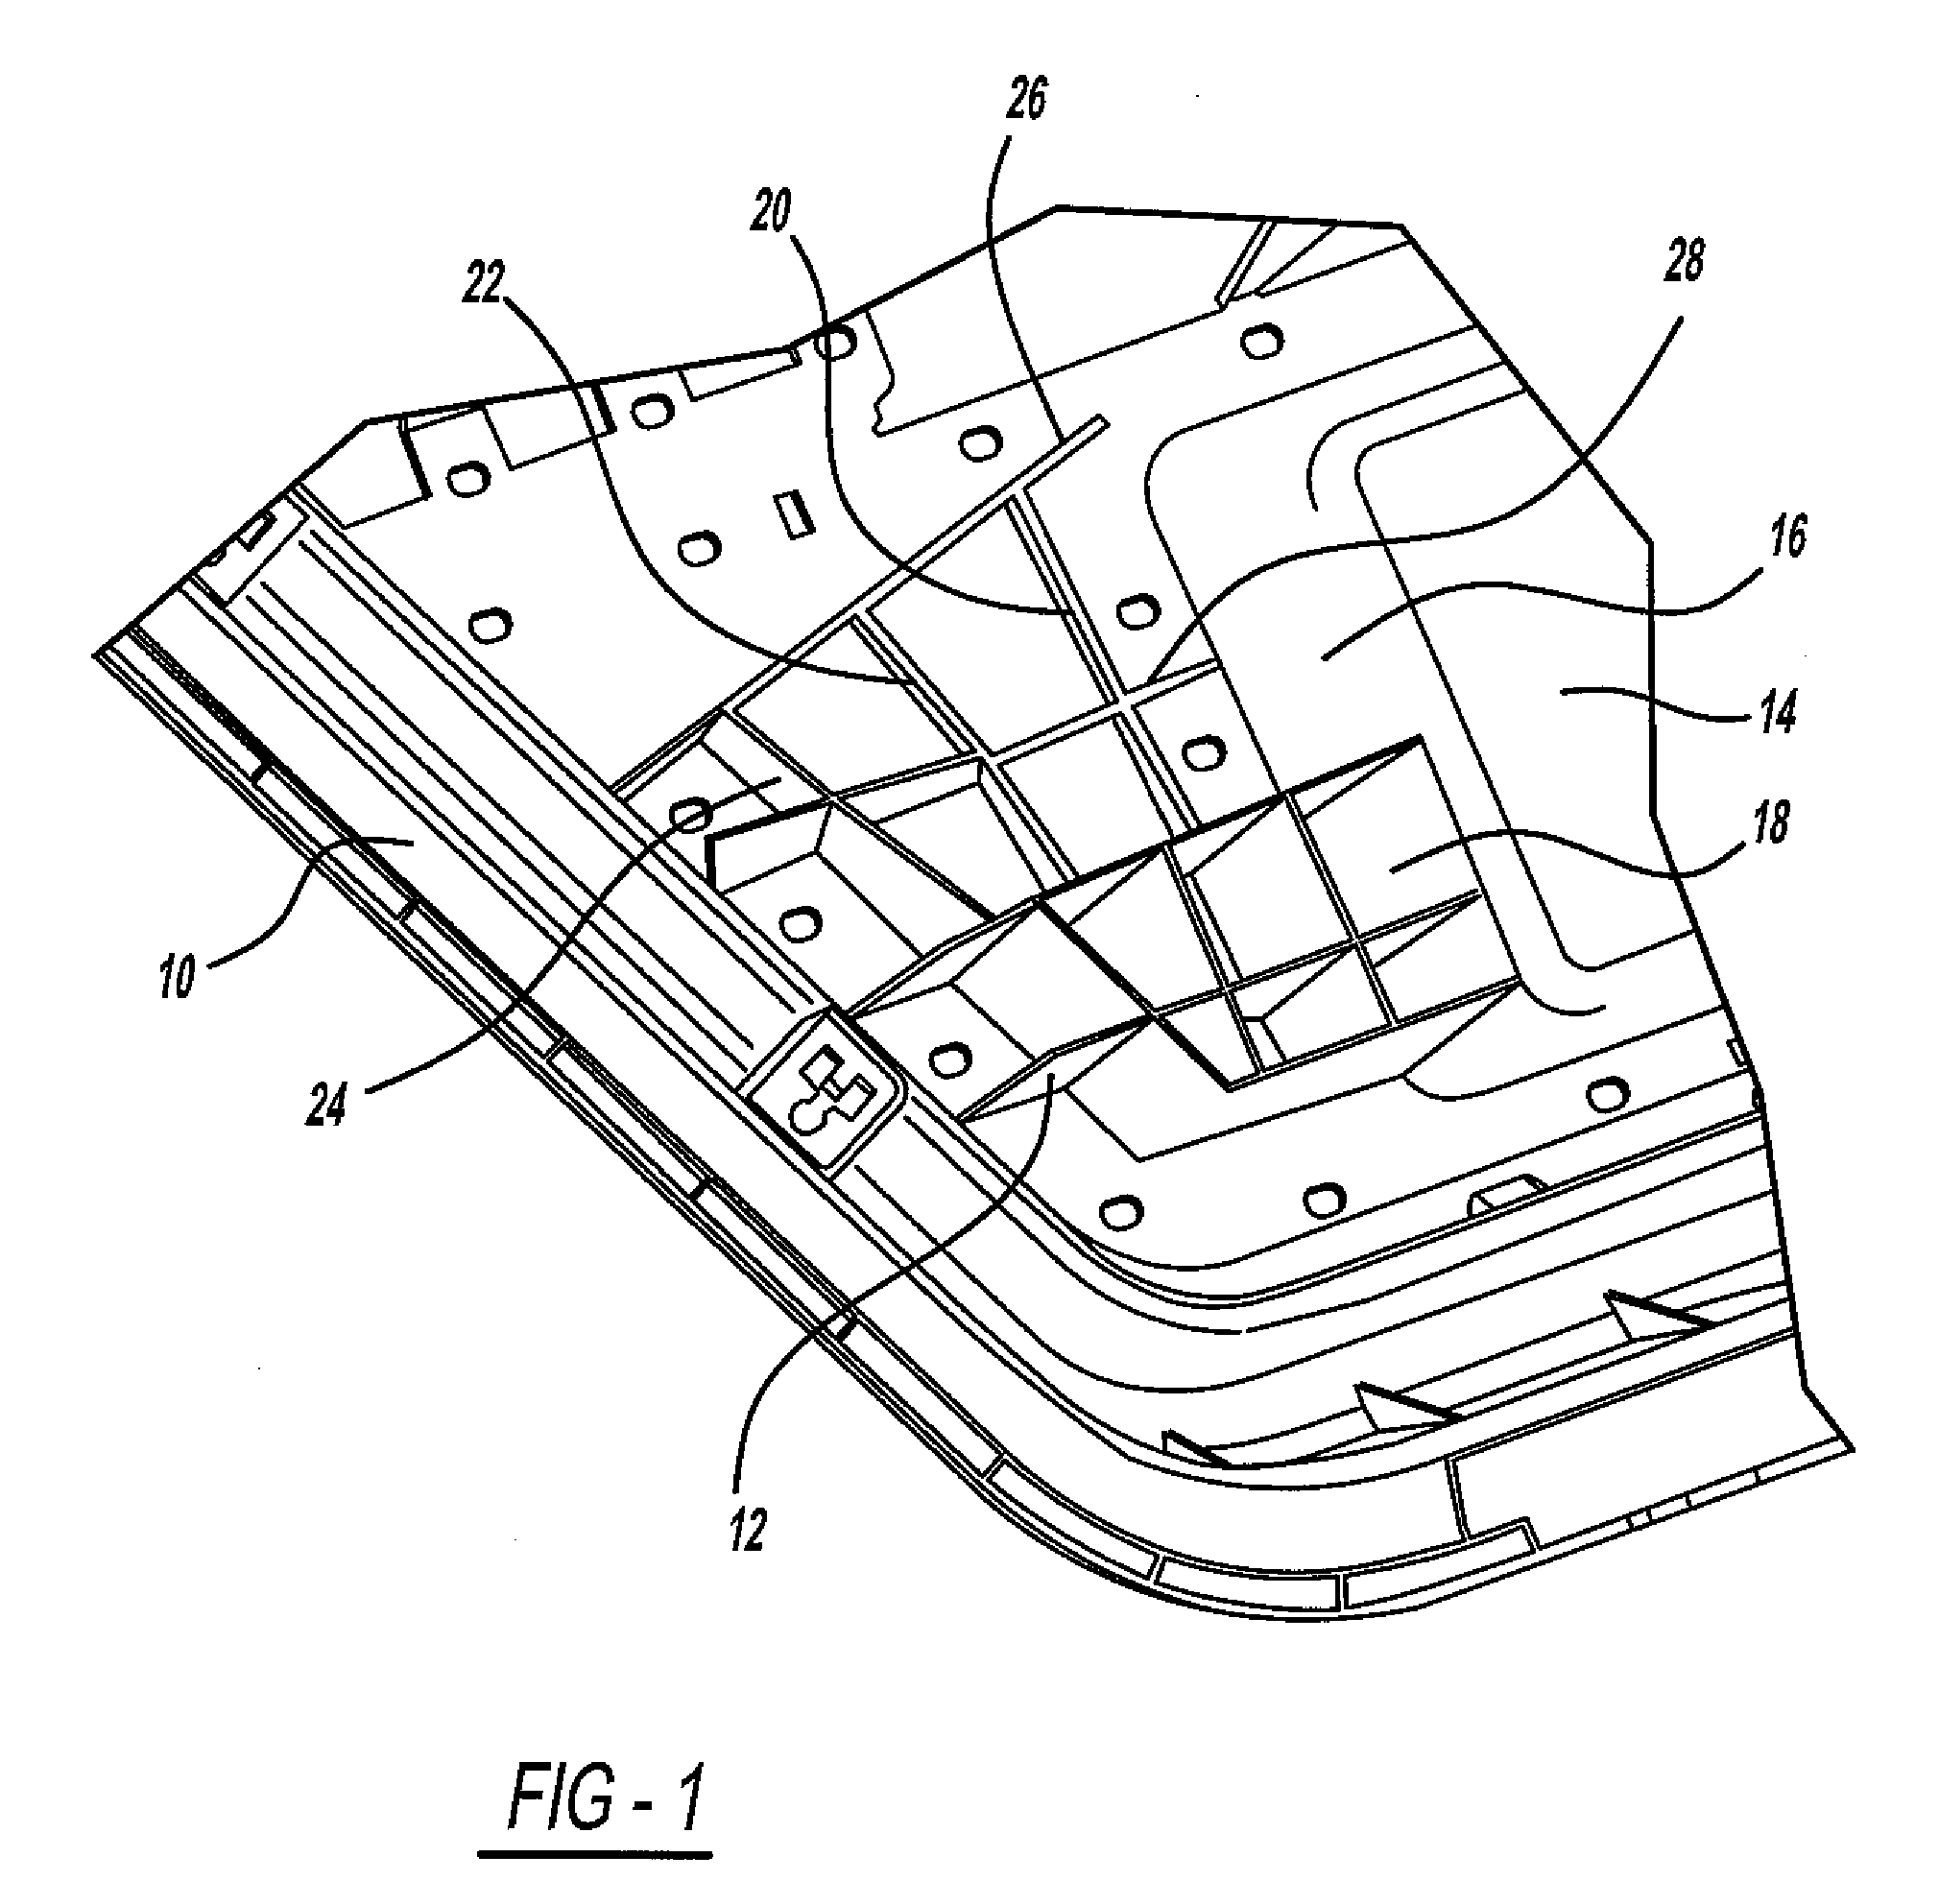 Door trim-integrated pelvic impact energy-absorbing construction for vehicle